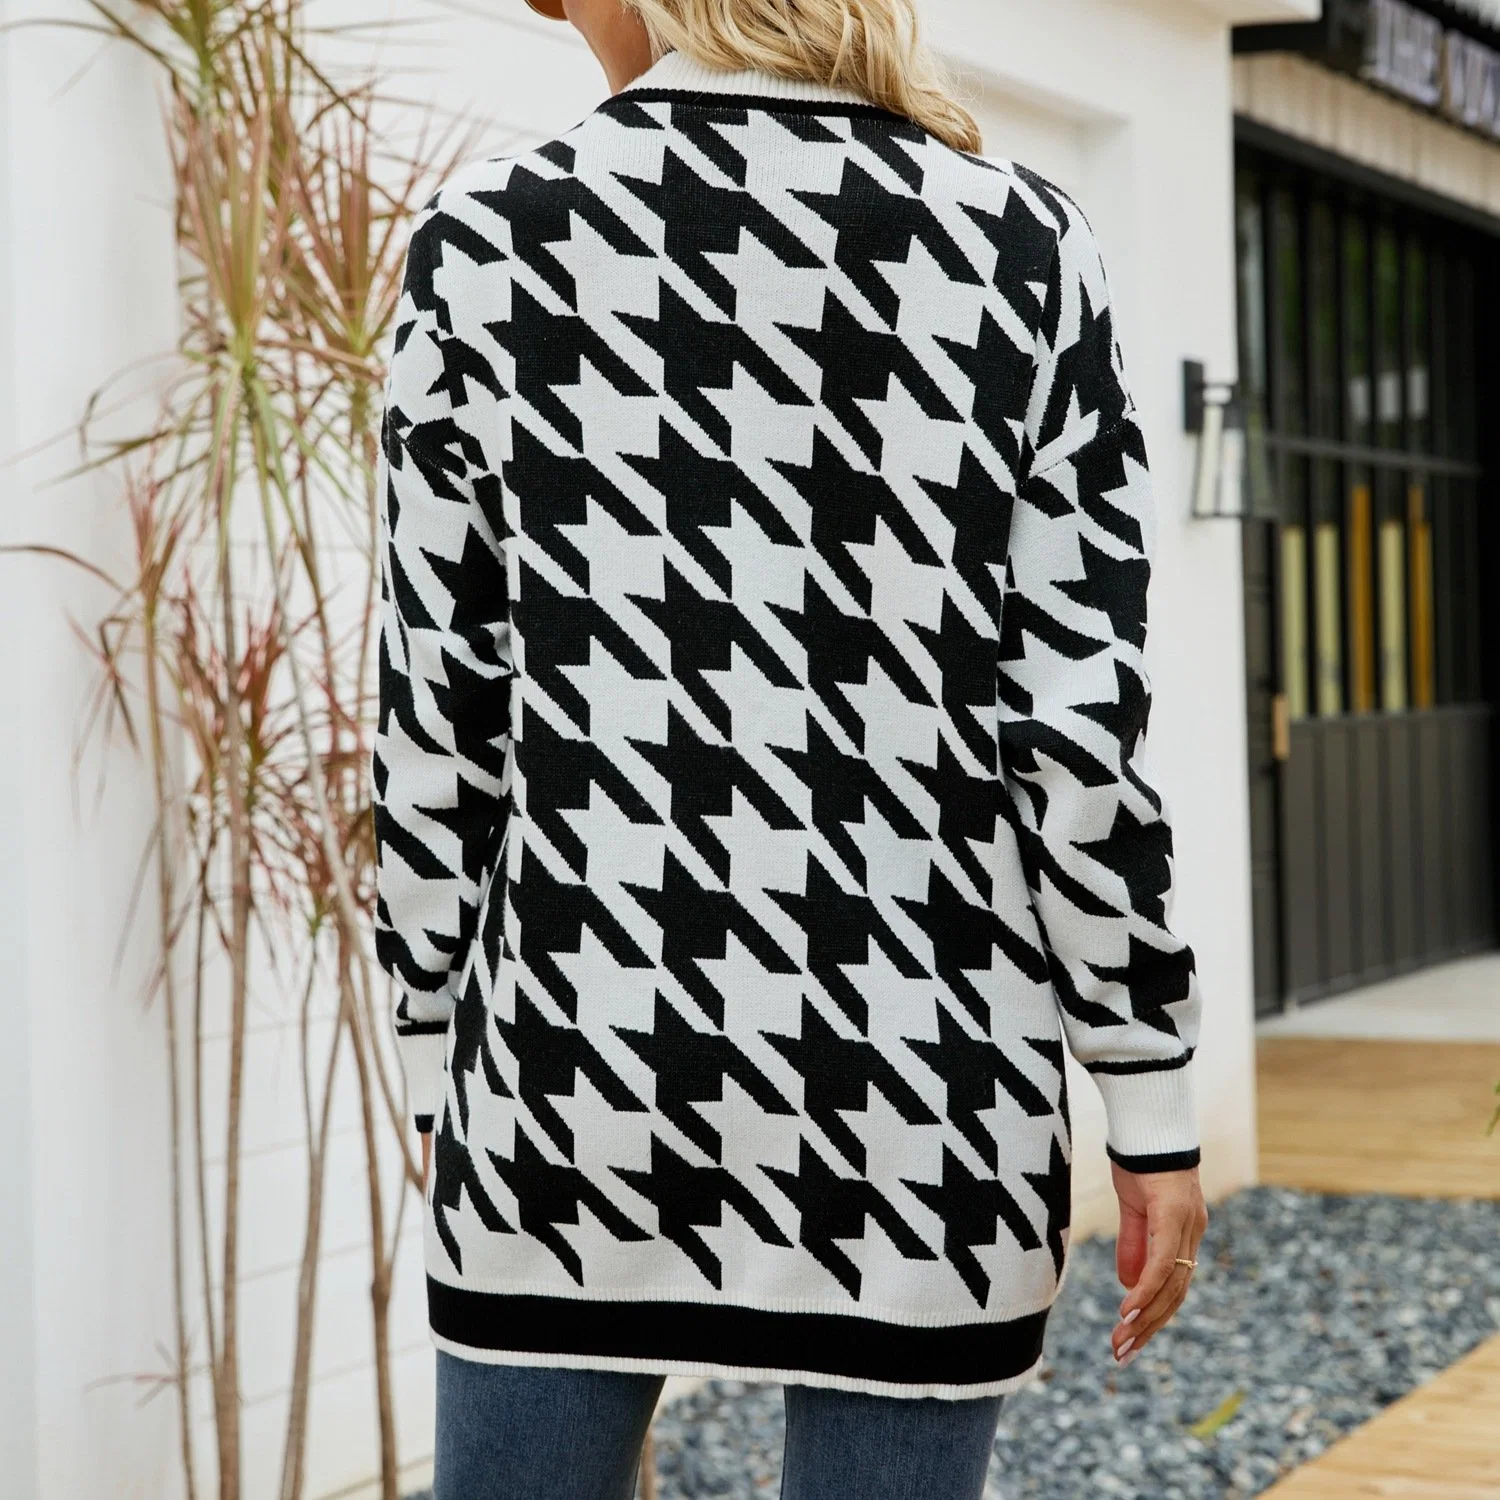 The New-Style Houndstooth Knitted Cardigan in The Long V-Neck Cardigan Sweater